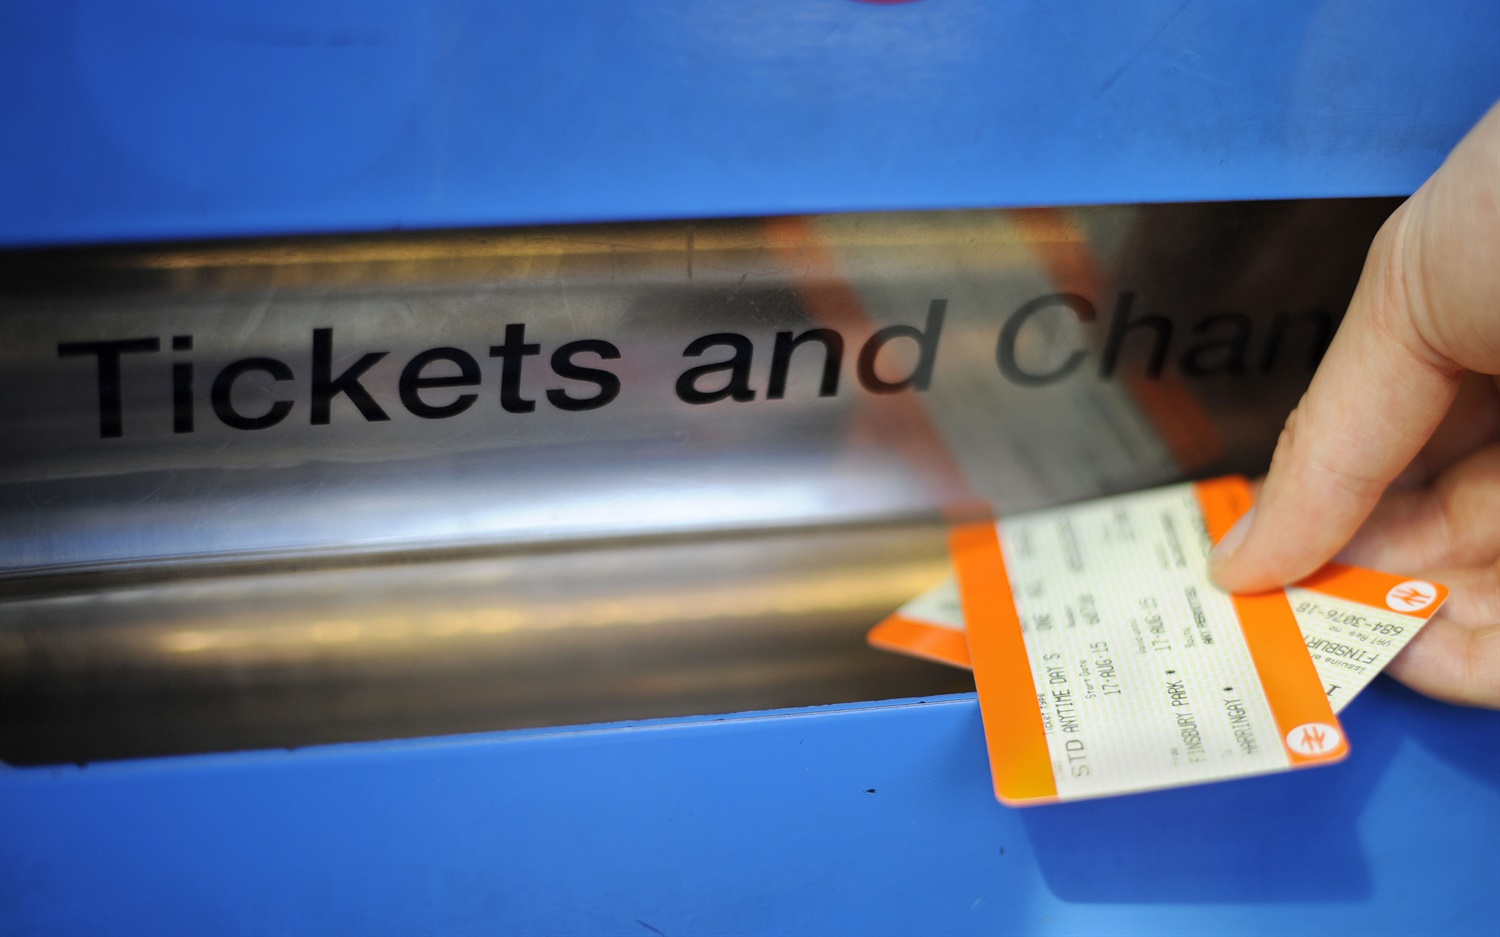 RMT launches campaign to stop closures of London Overground ticket offices